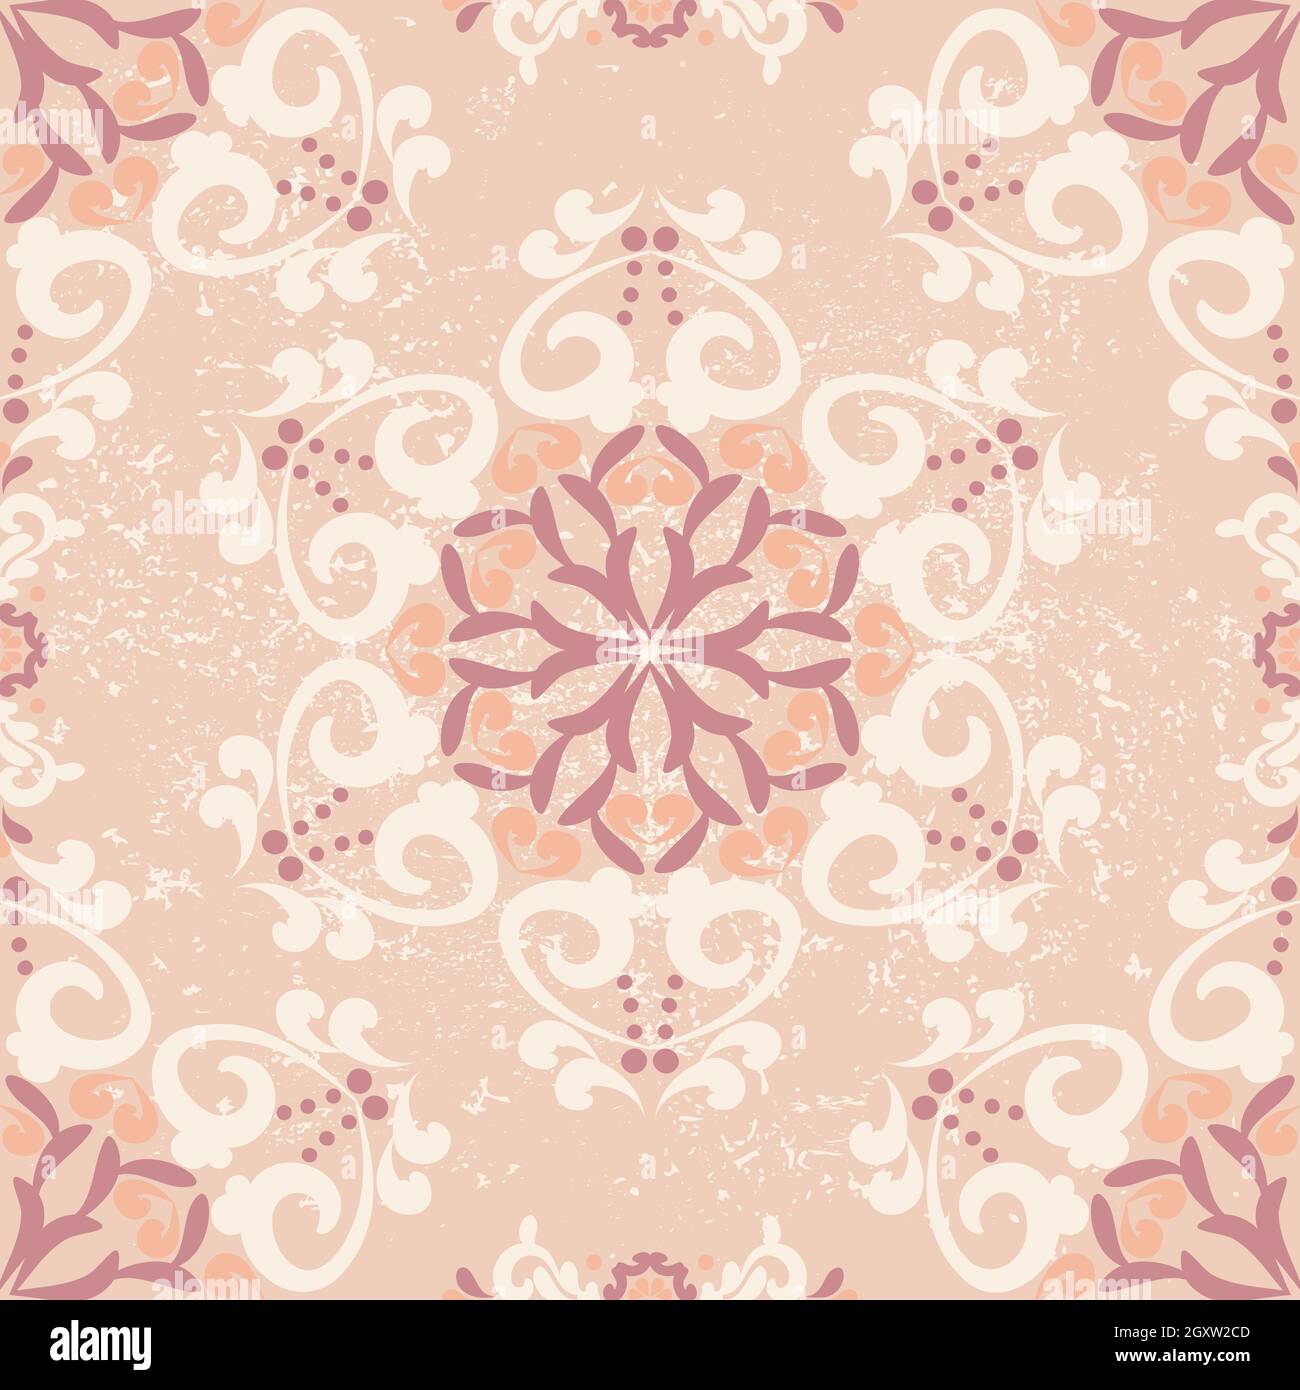 Floral seamless pattern. Geometric damask patterned background. Pink, beige color. For fabric, tile, wallpaper or packaging. Vector graphics. Stock Vector